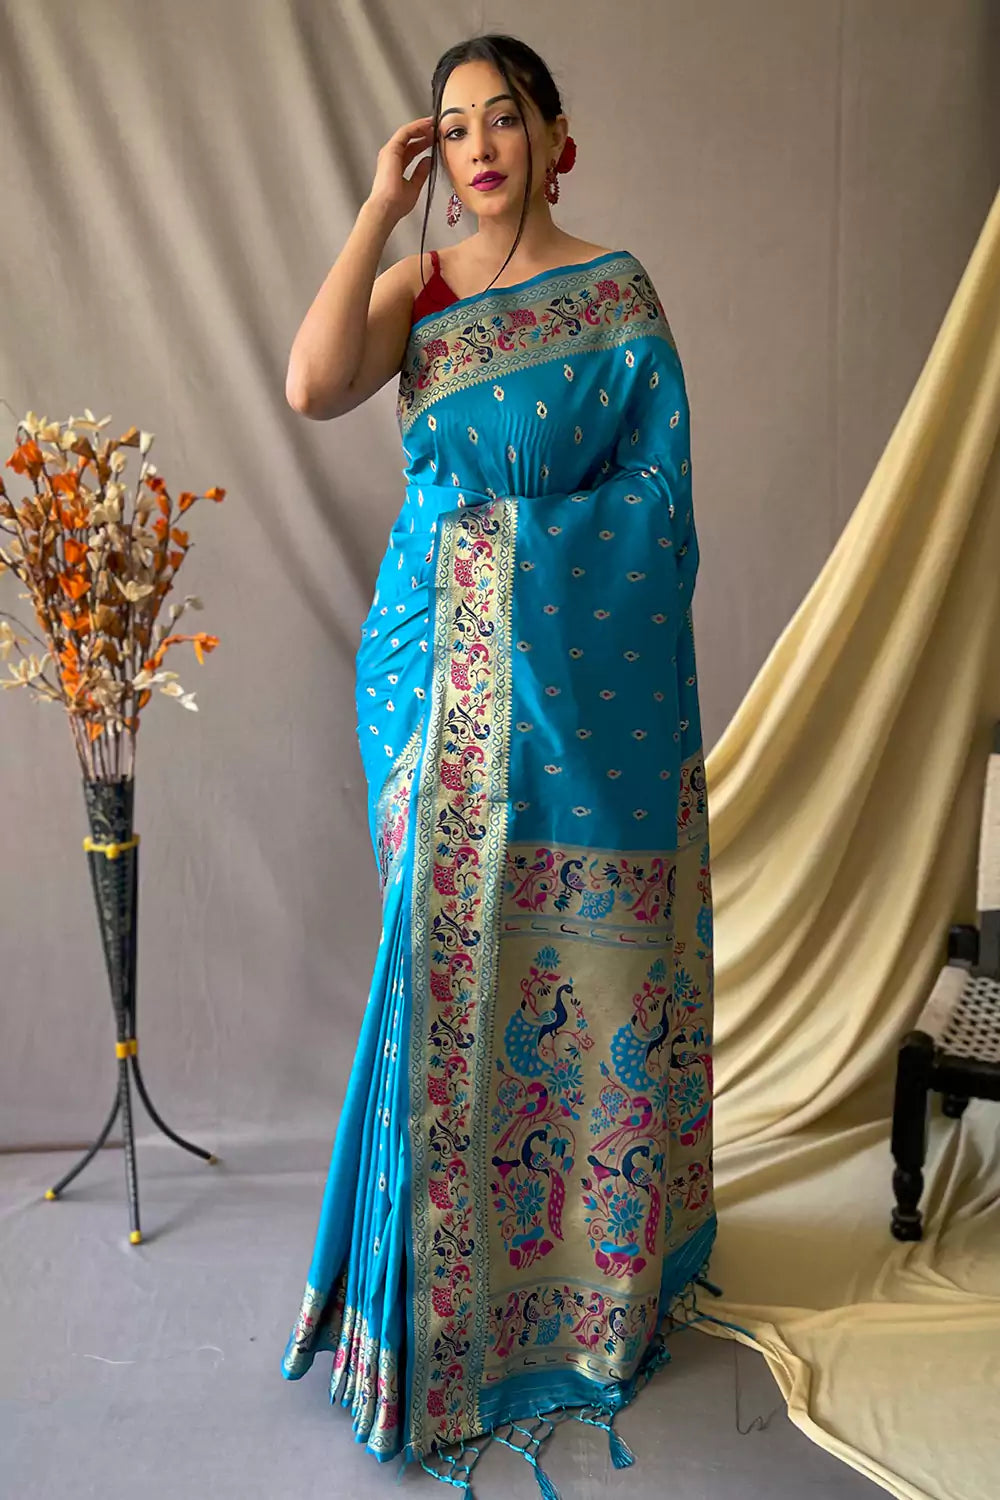 Buy ANNI DESIGNER Women's Sky Blue Color Cotton Silk Saree With Blouse  Piece (Shraddha_2173_Free Size) at Amazon.in